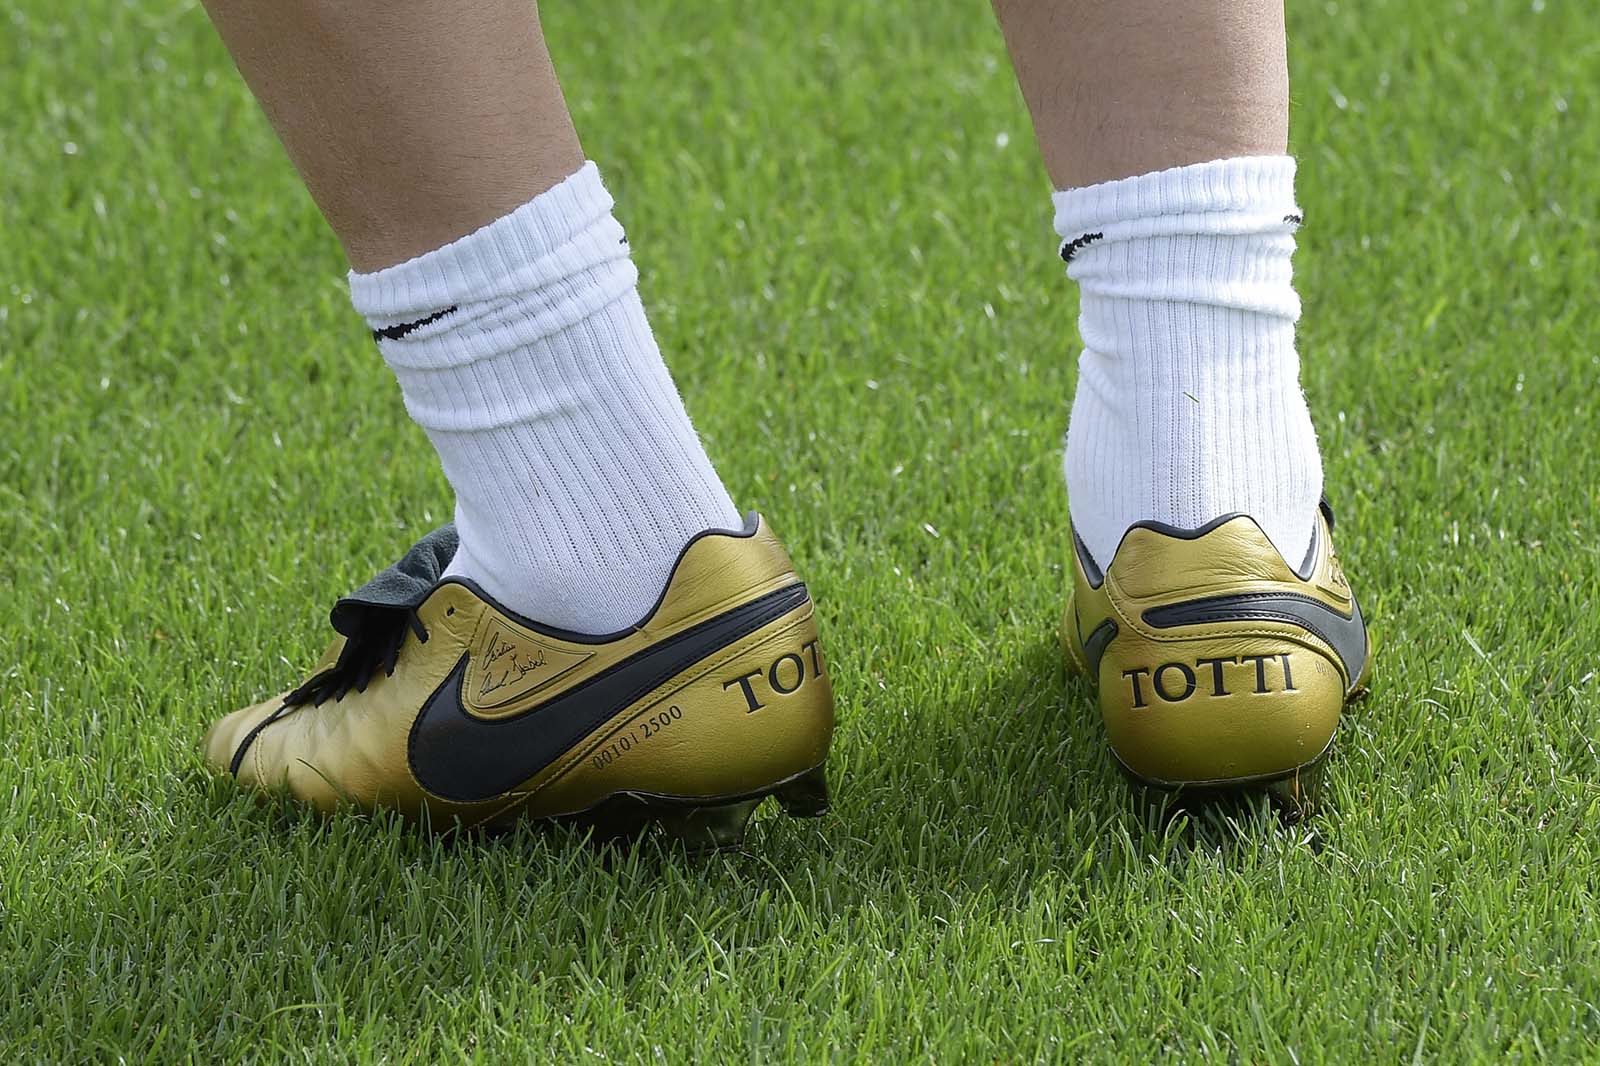 totti-trains-in-nike-tiempo-x-totti-boots-with-exclusive-detail%2B%25288%2529.jpg